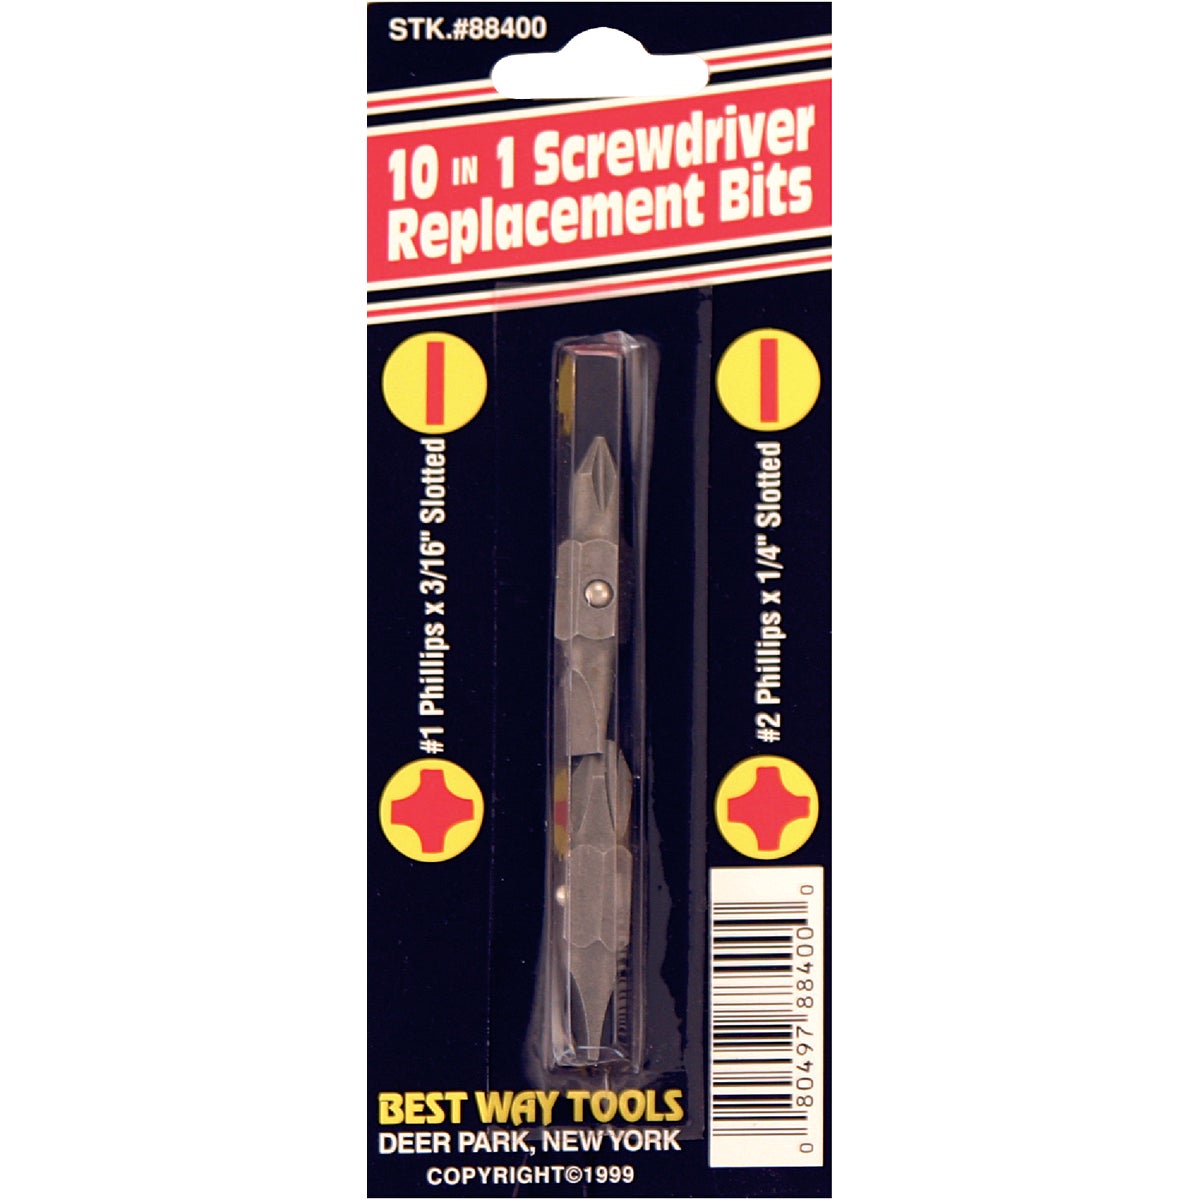 Item 357223, Double end replacement bits for Best Way Tools 11-in-1 screwdriver/nut 